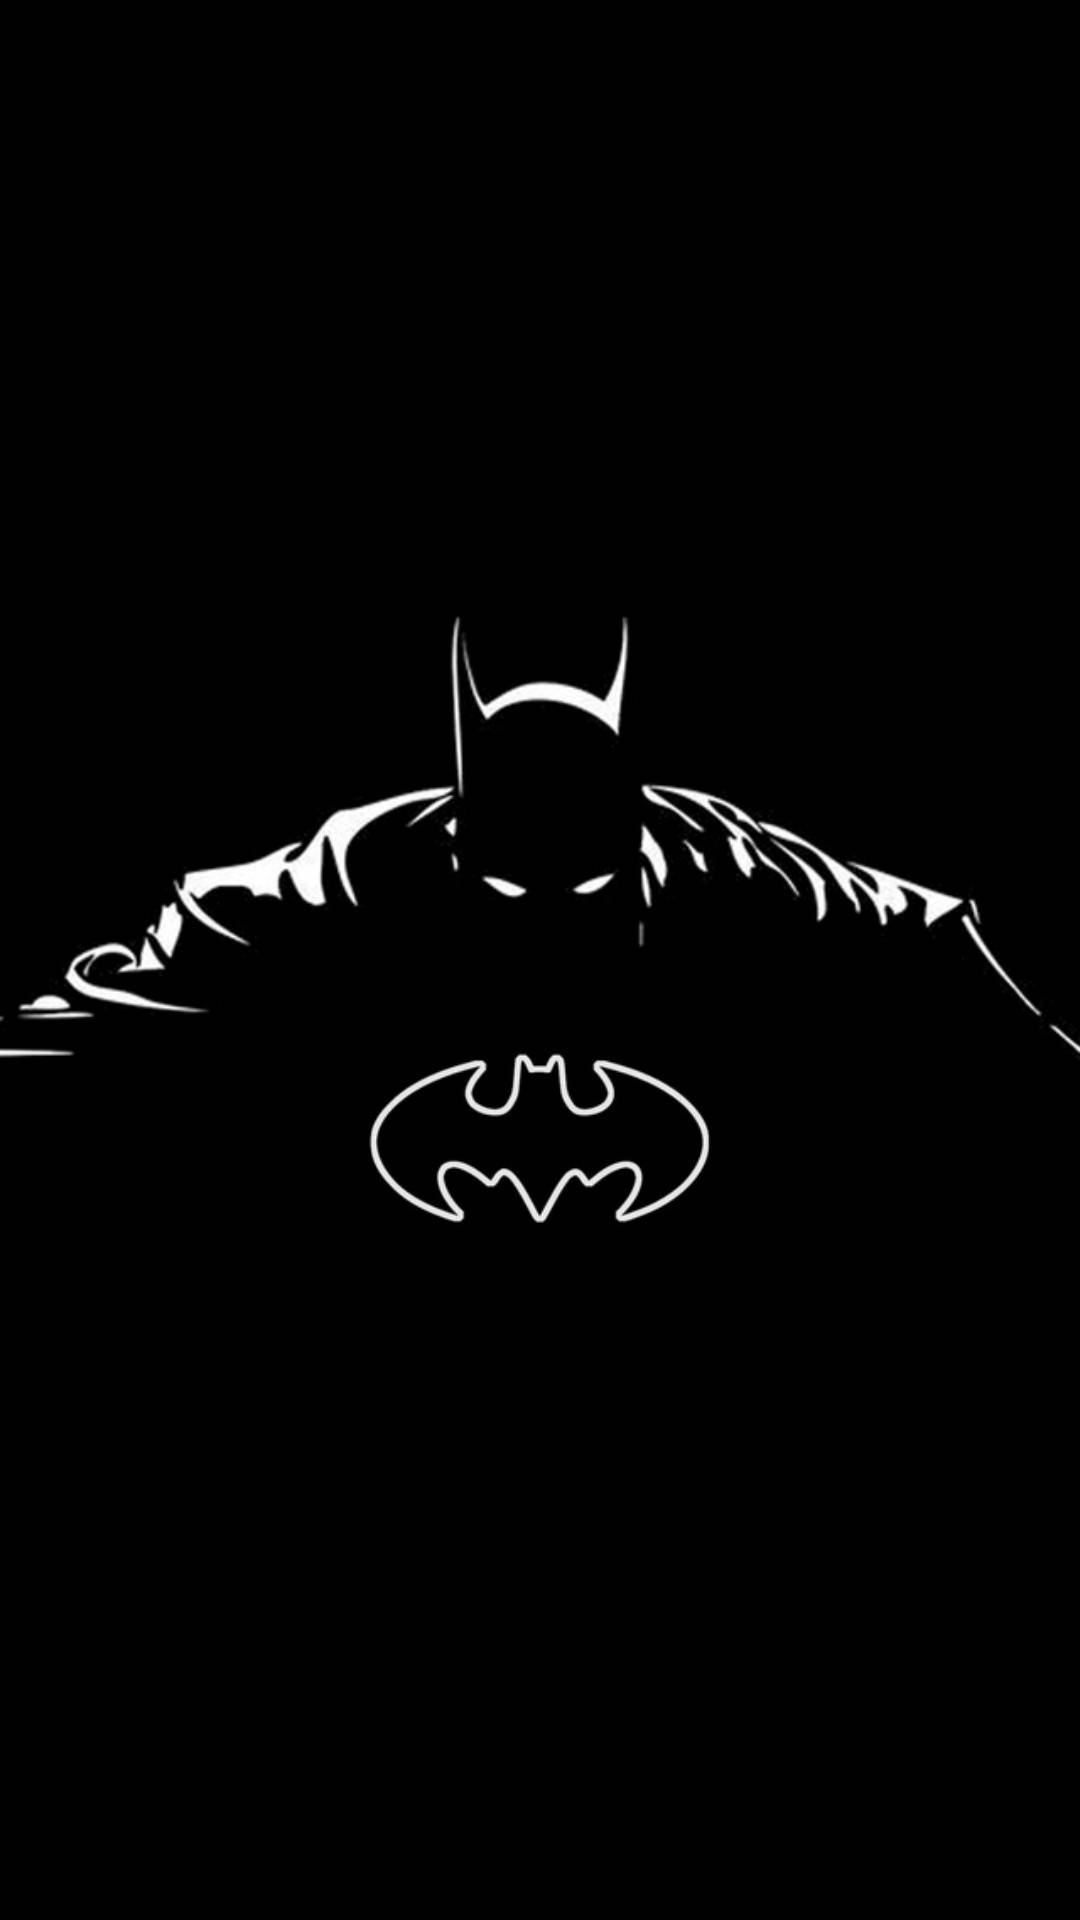 How to Draw Batman - EASY Step by Step Tutorial | Easy Drawing Guides